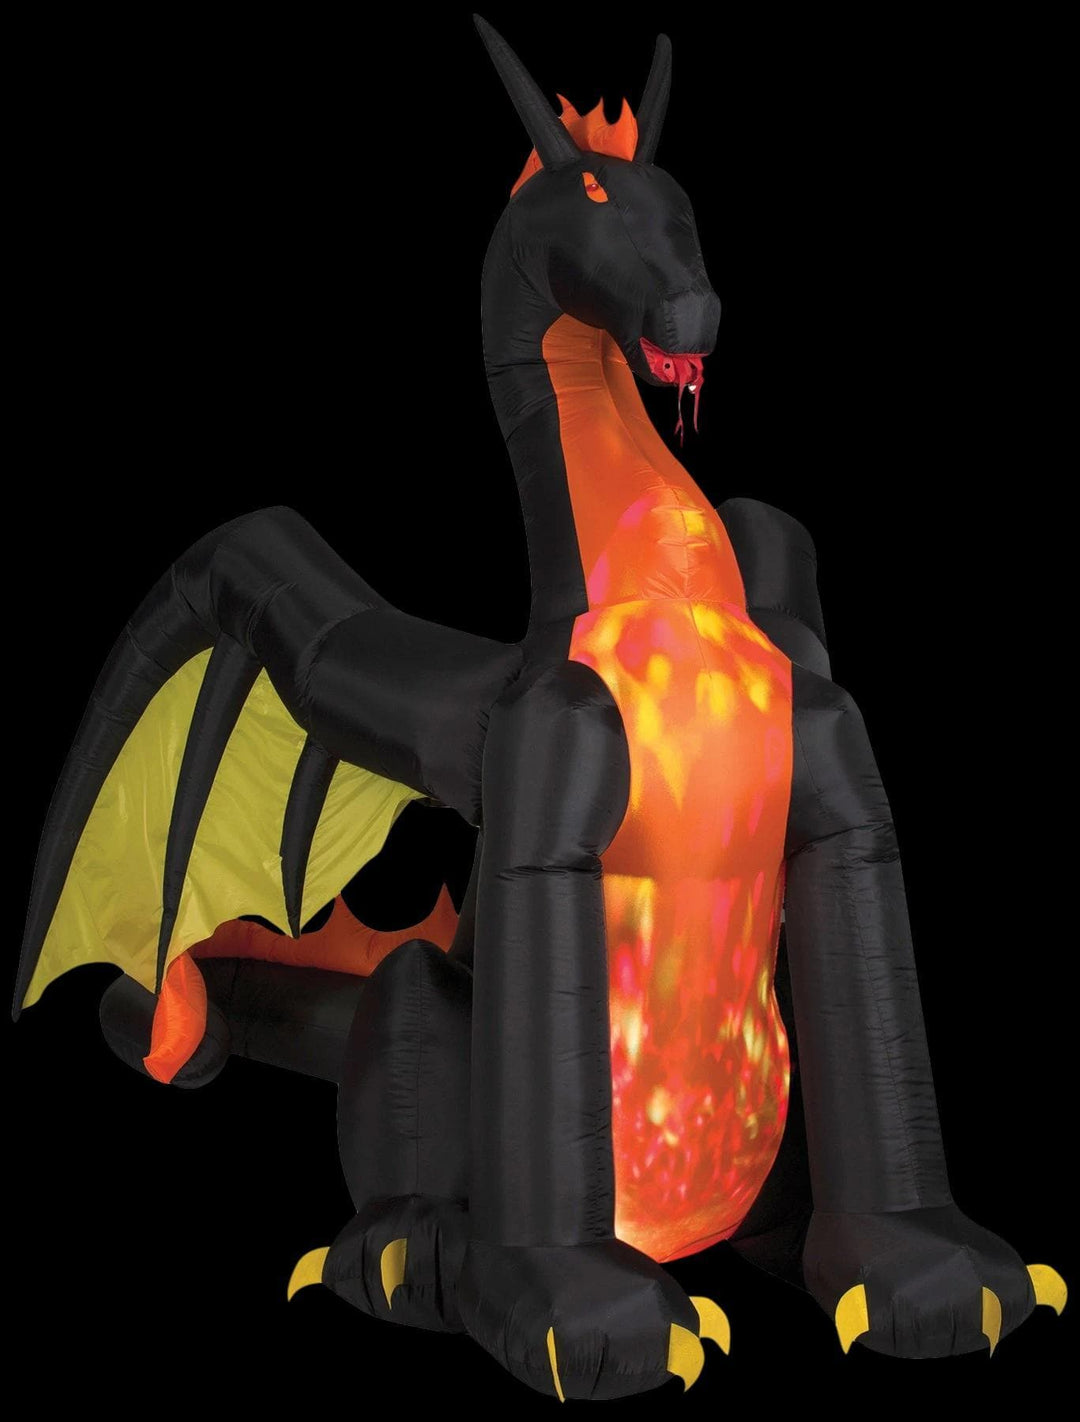 "Dragon with Projection and Fire" Air-blown Inflatable Halloween Decoration